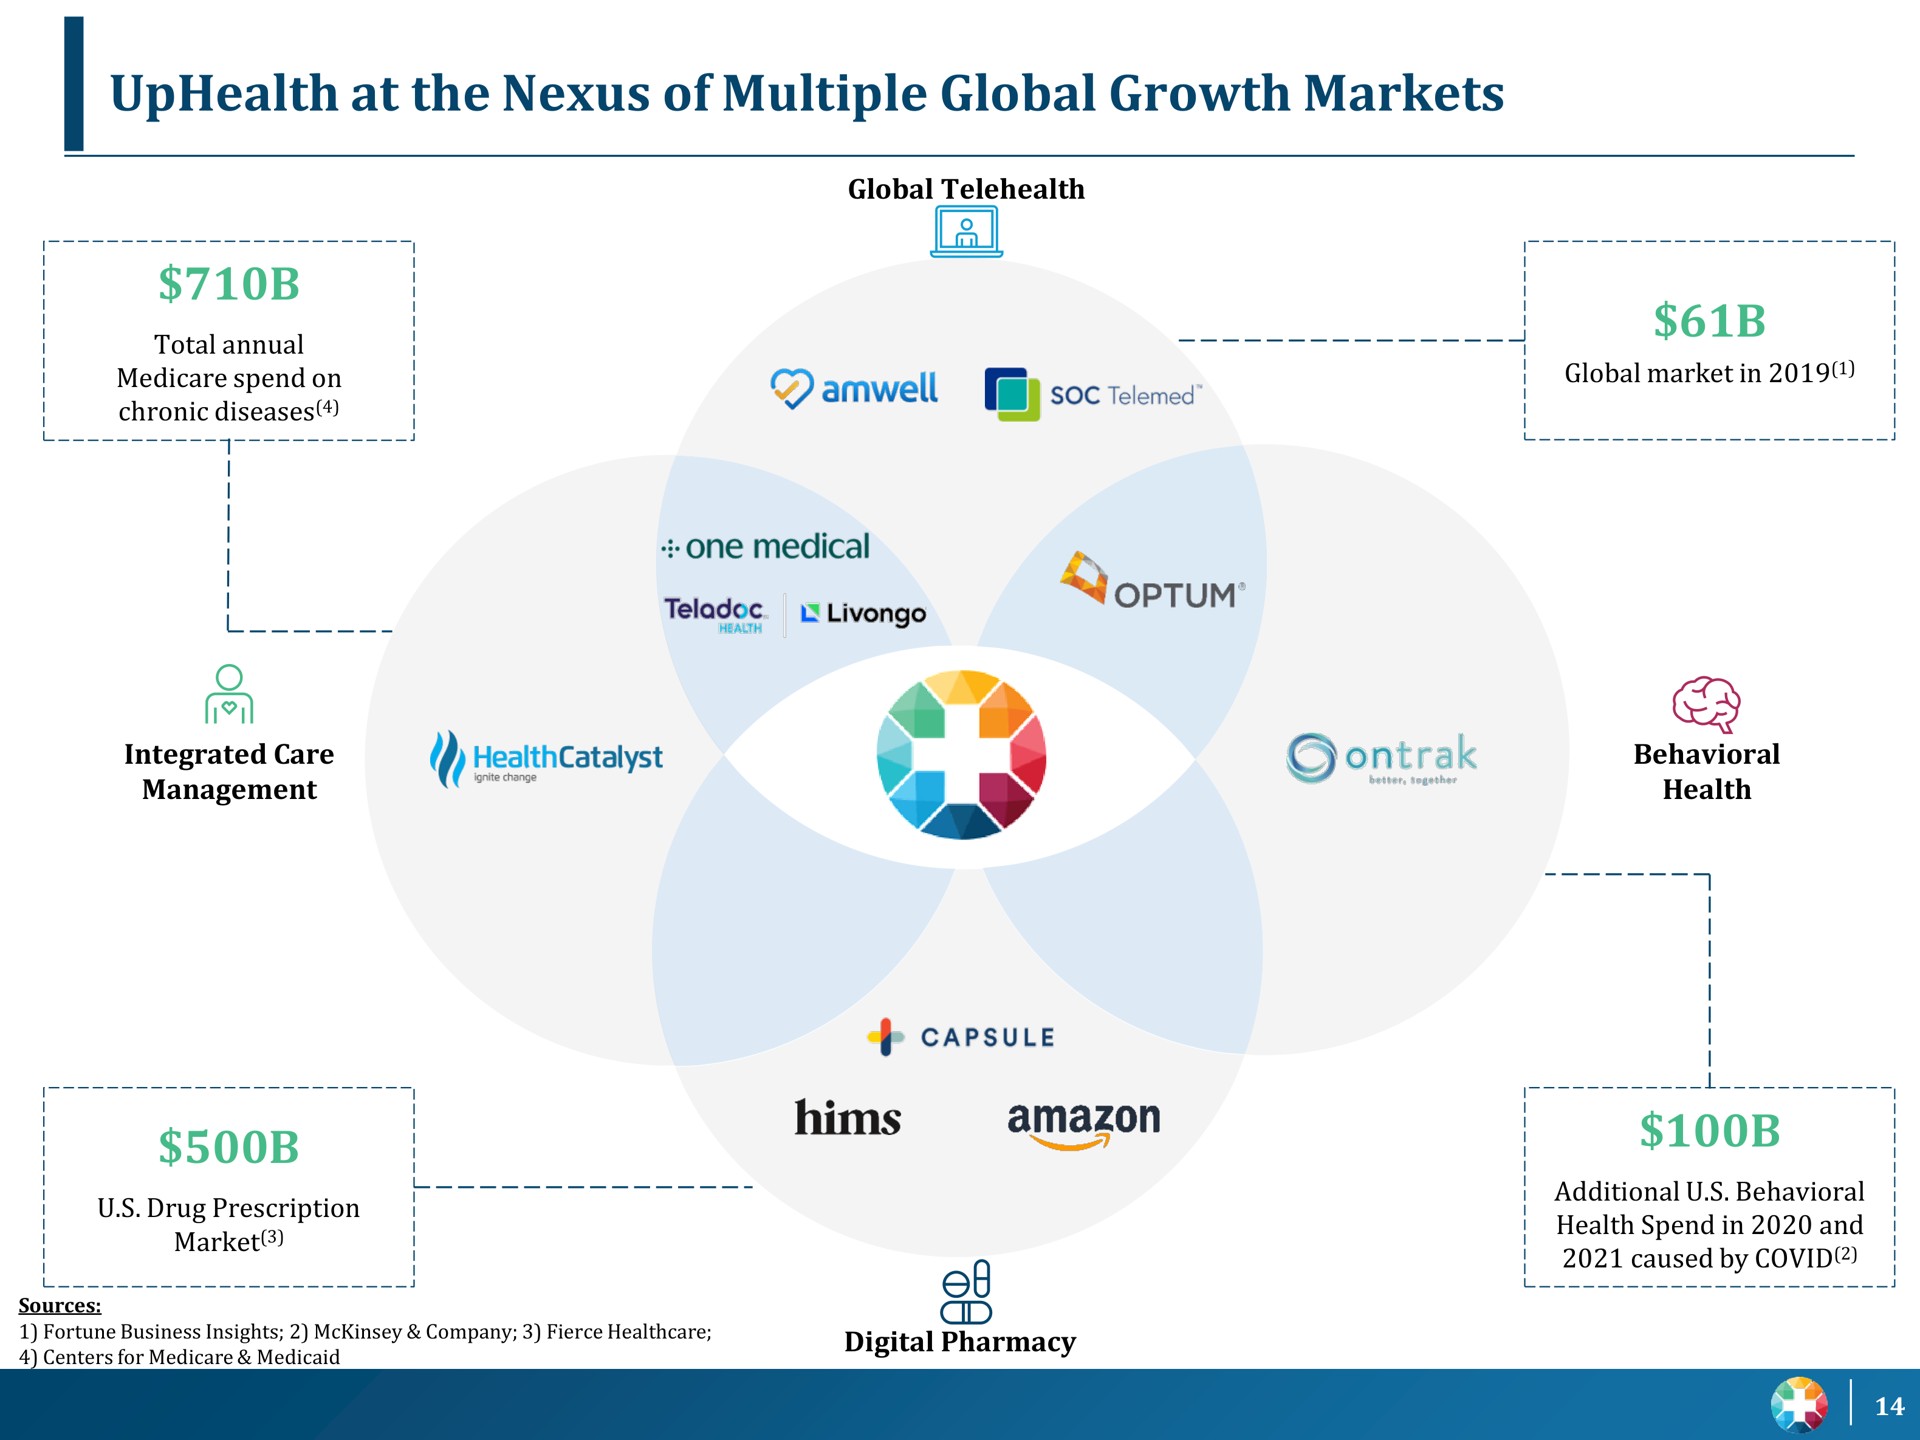 at the nexus of multiple global growth markets a car | UpHealth